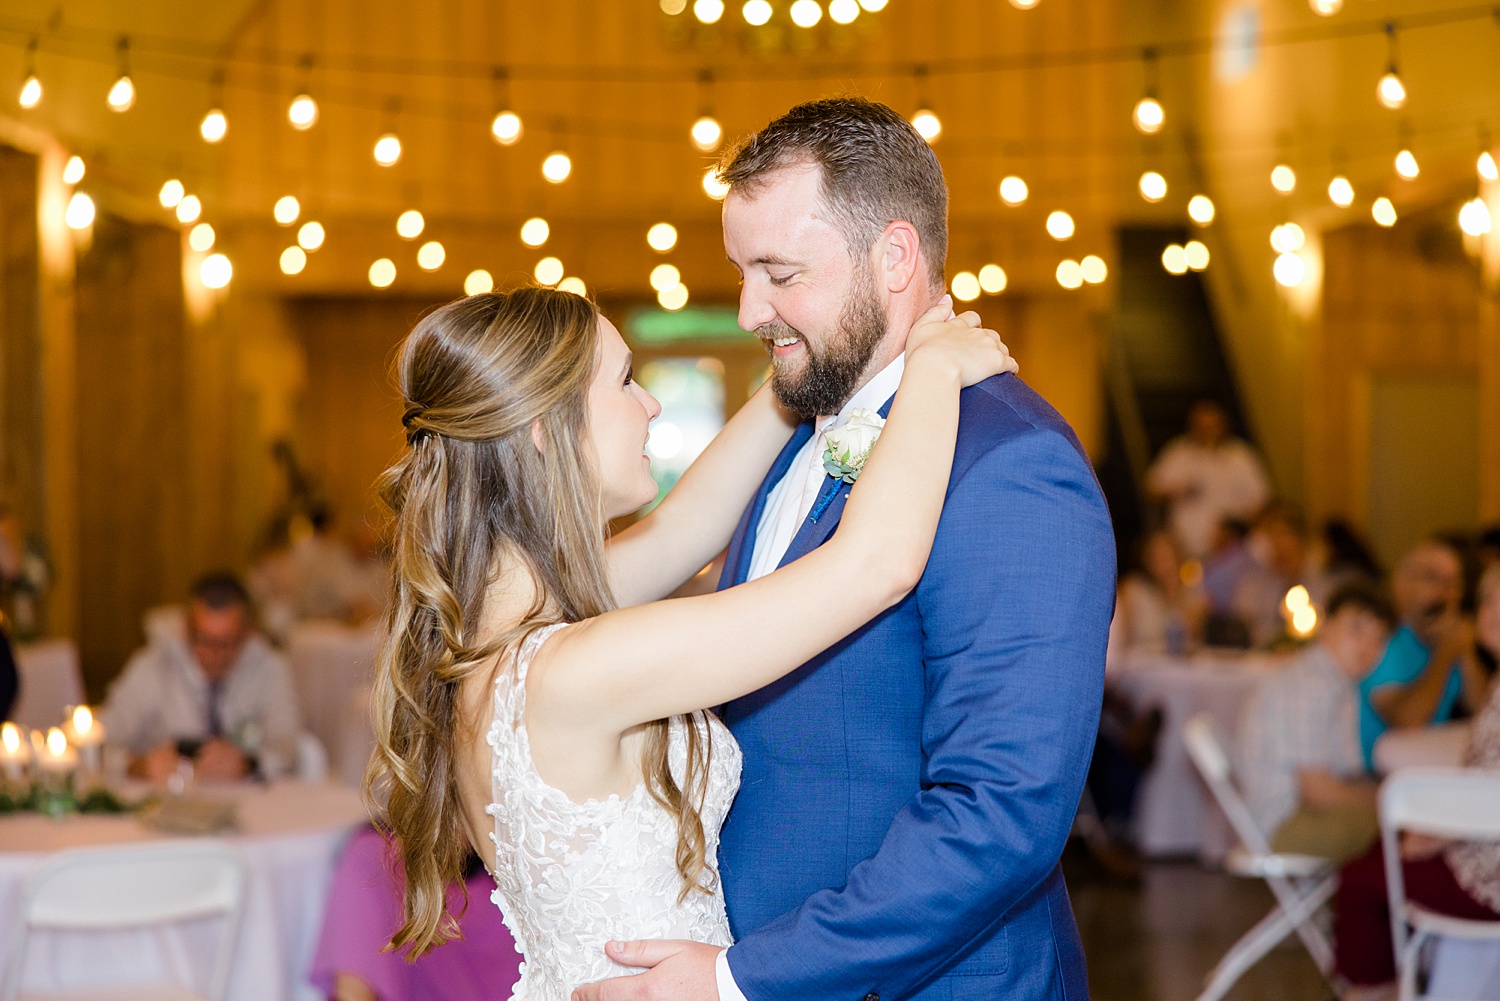 newlyweds share their first dance together as husband and wife